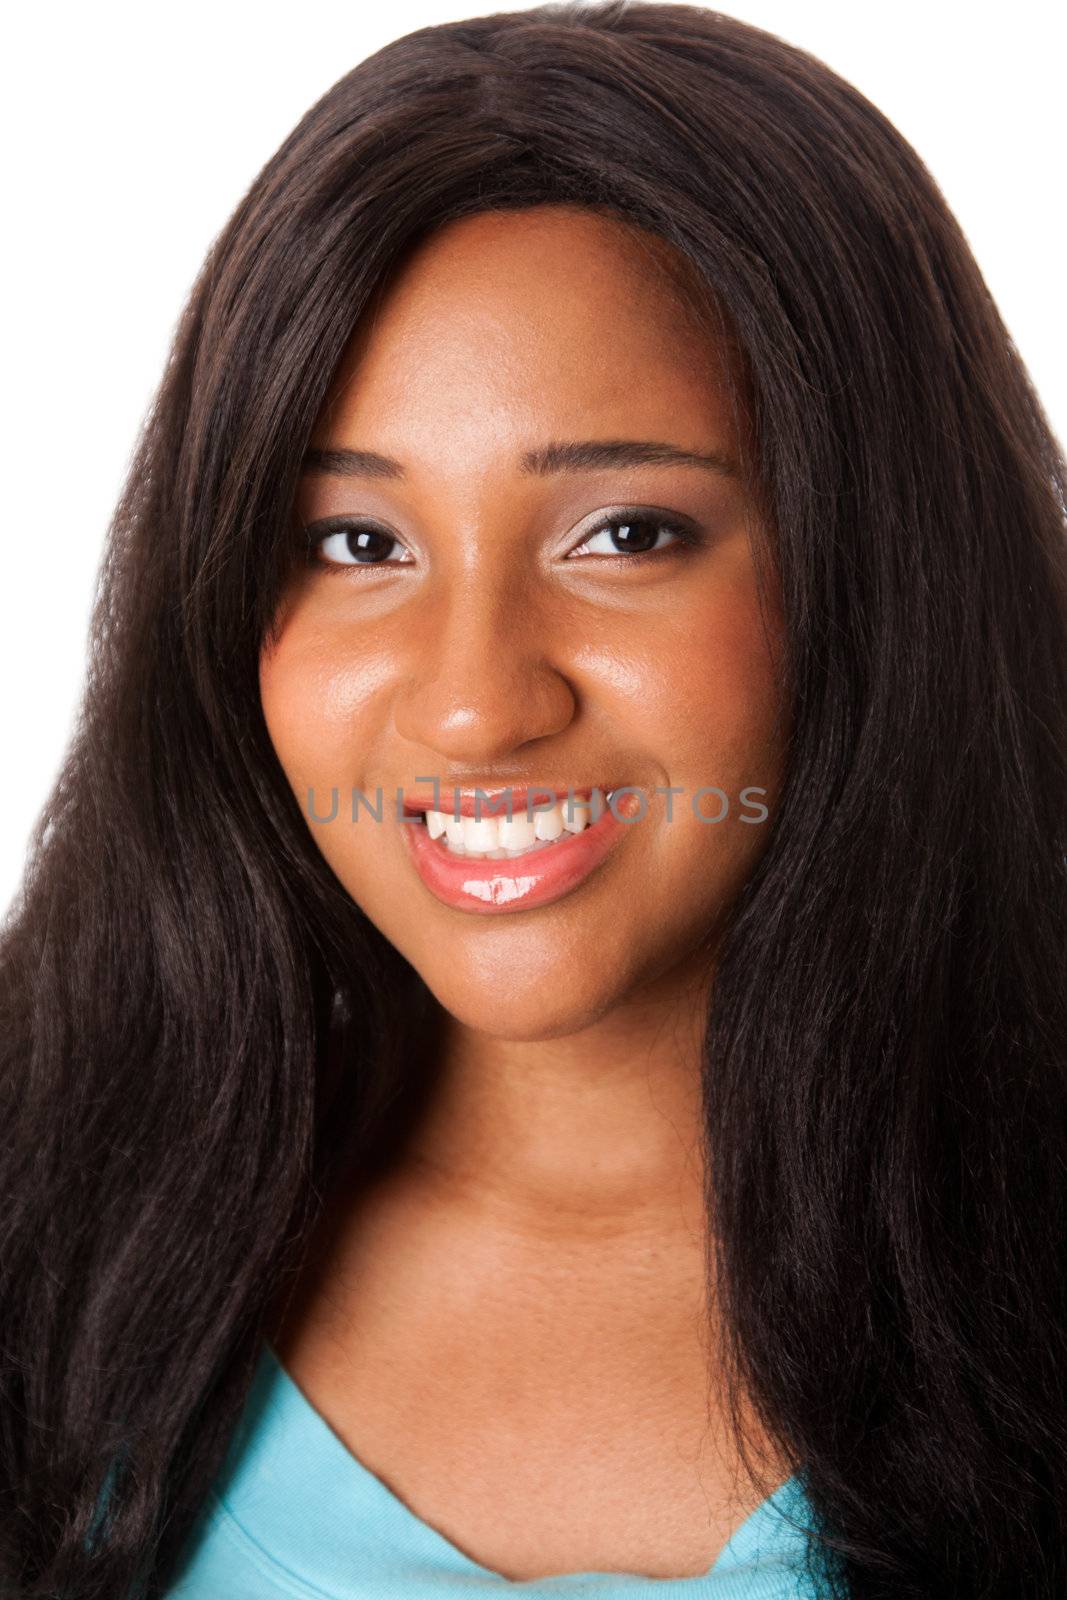 Face of a beautiful African Caribbean teenager girl with long black hair, isolated.